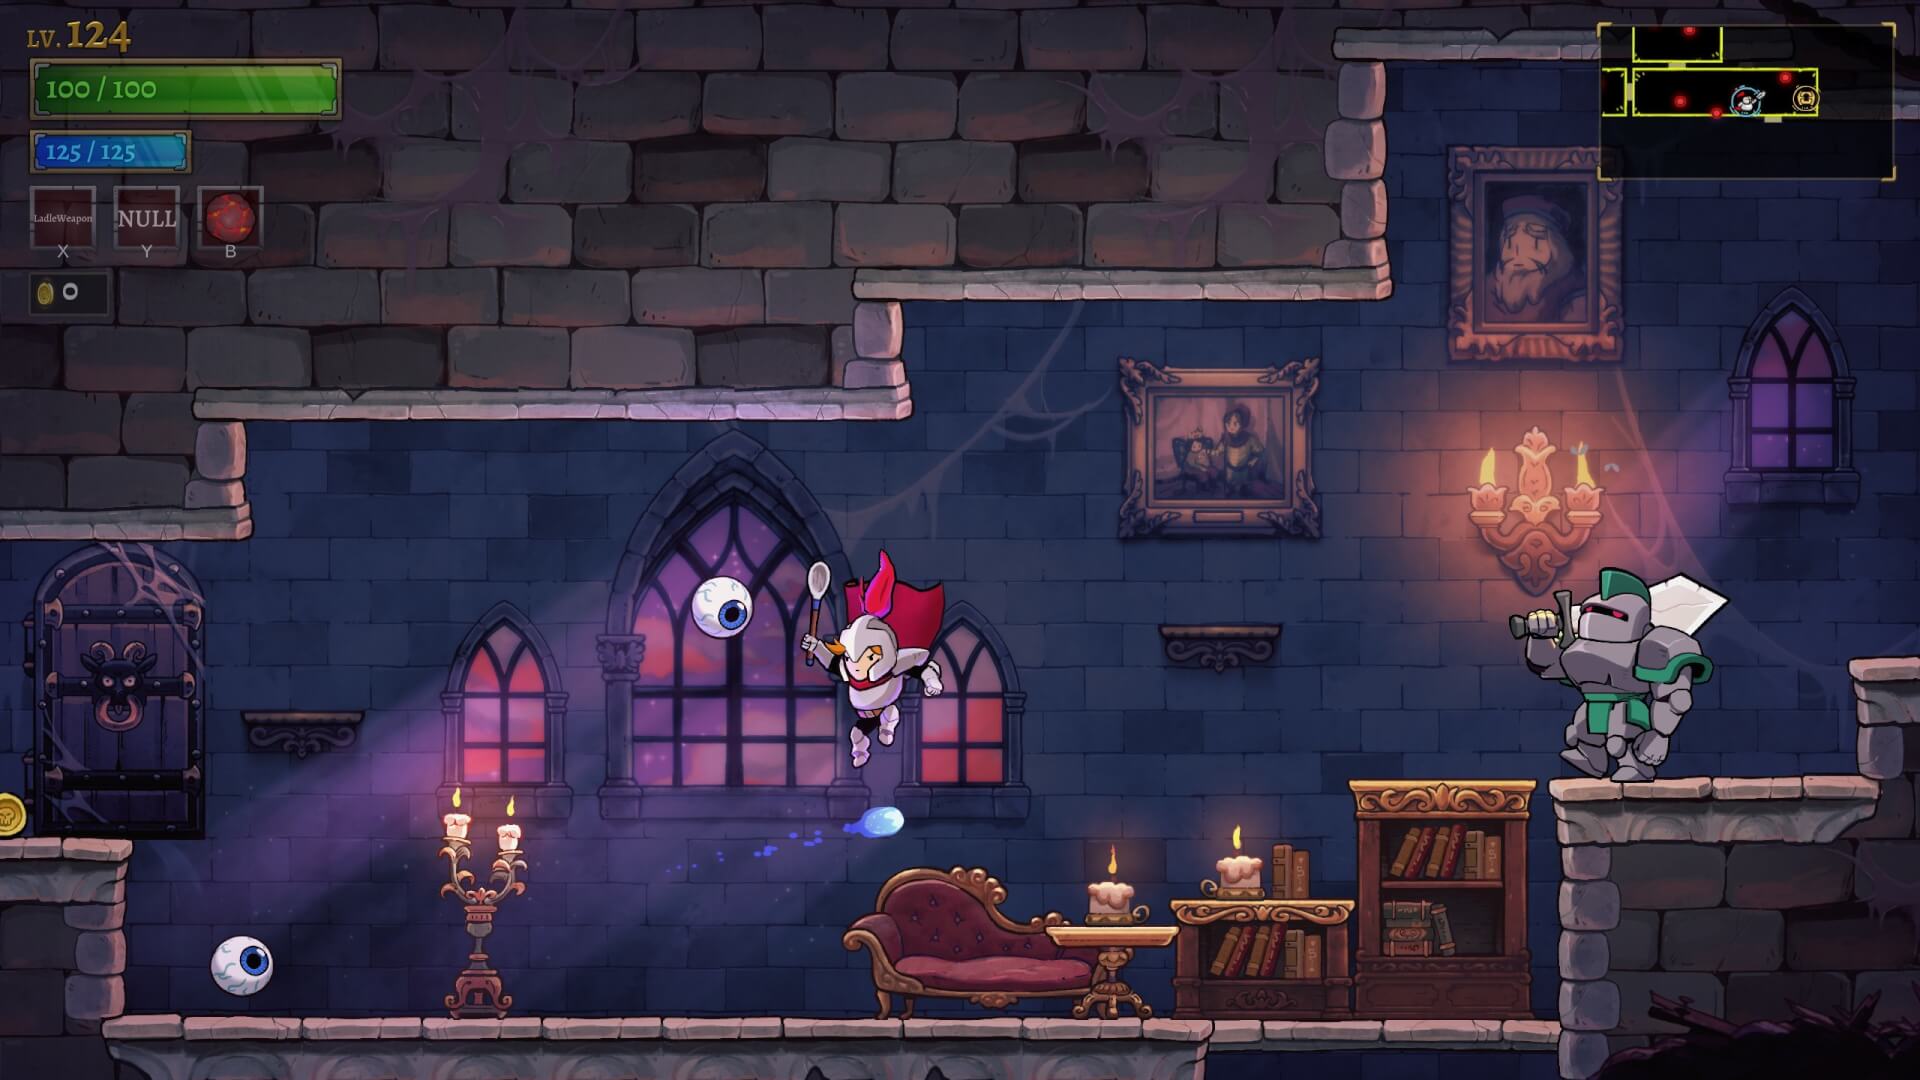 download Rogue Legacy 2 free